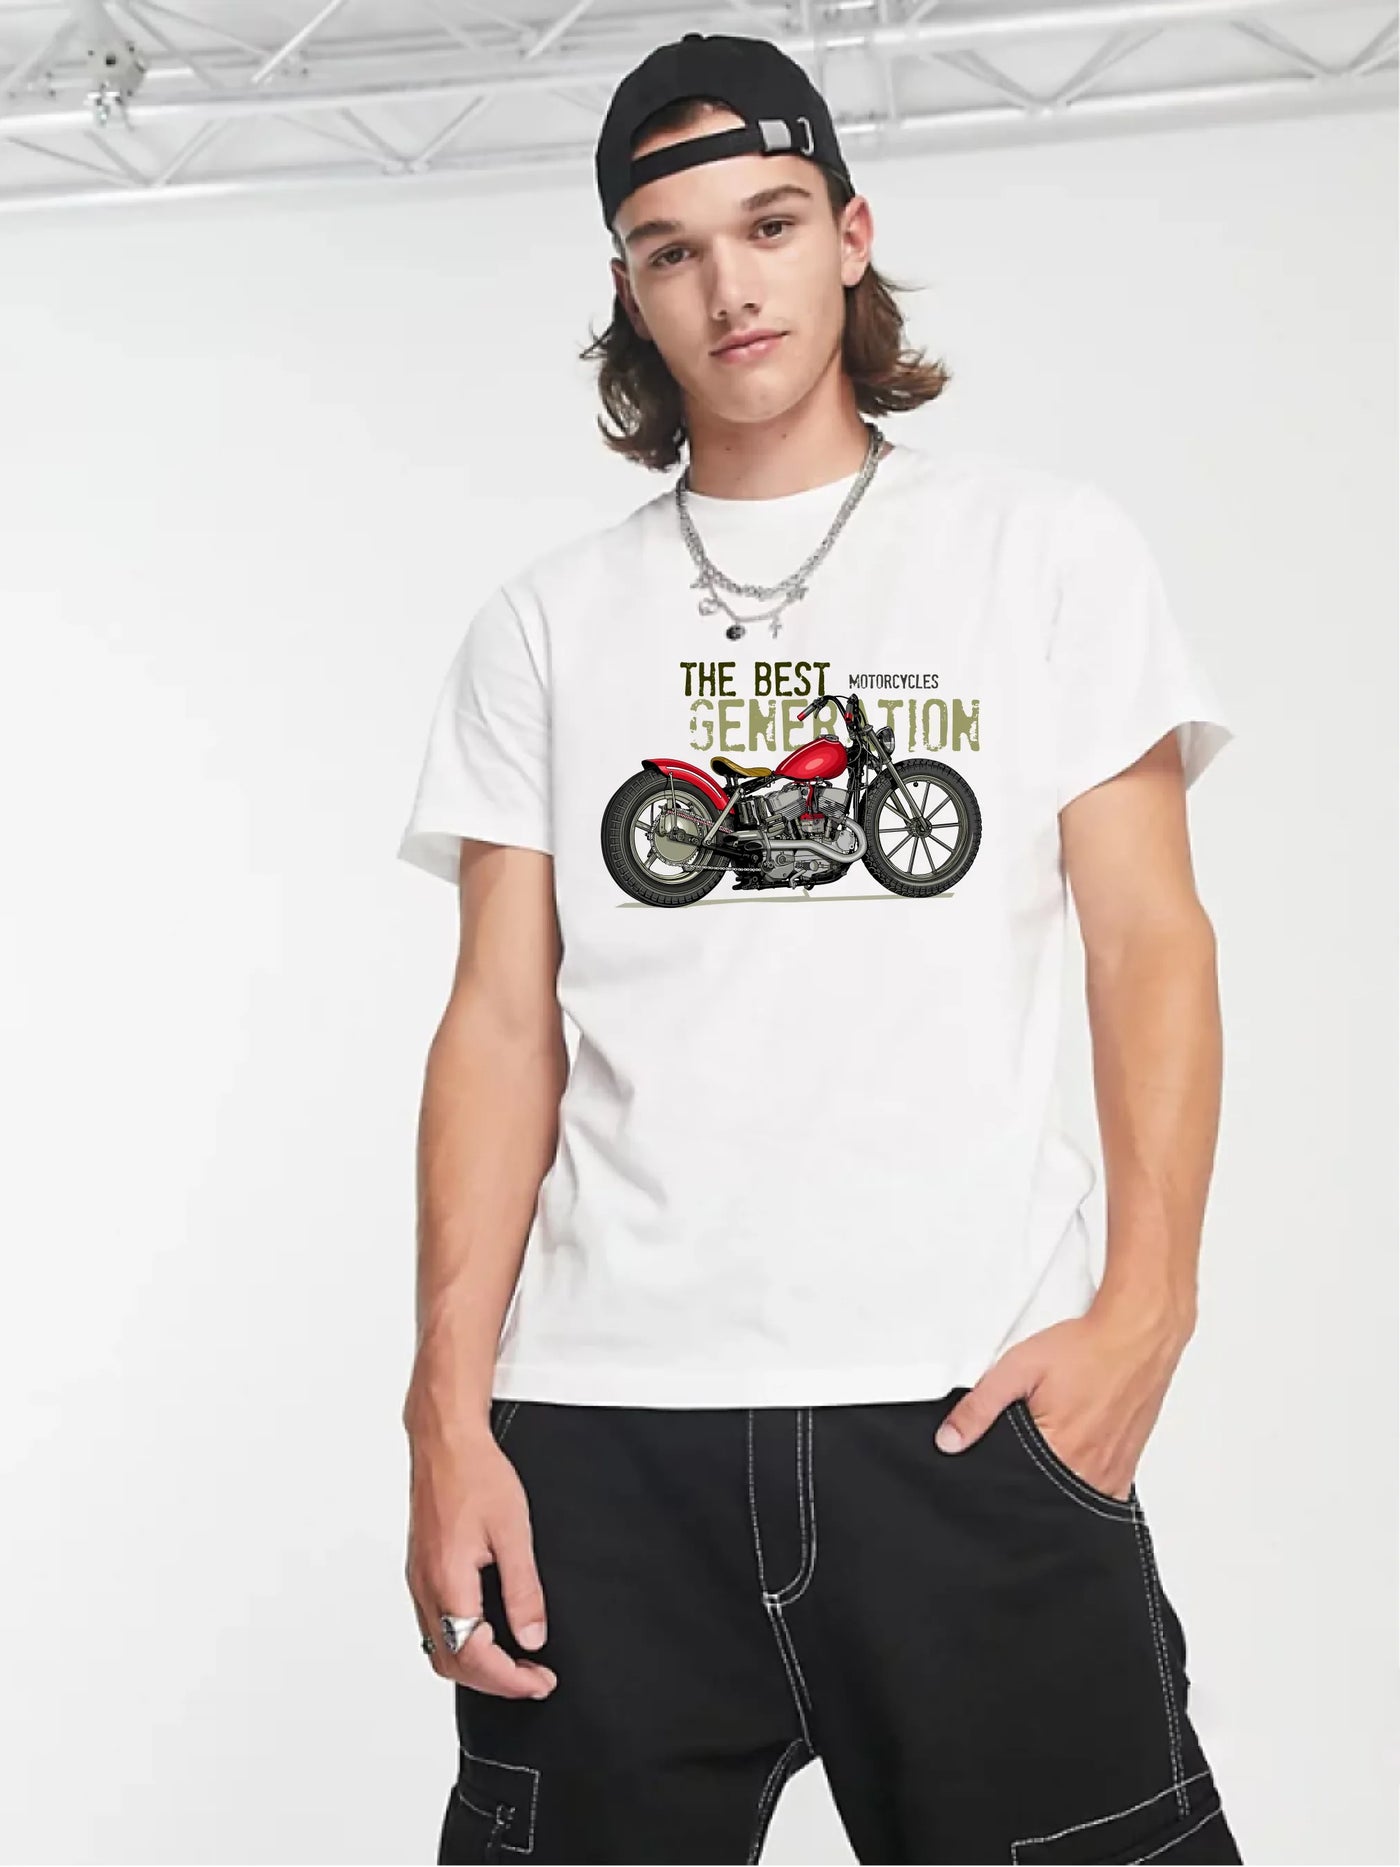 The Best Generation Motorcycles - Unisex T-Shirt